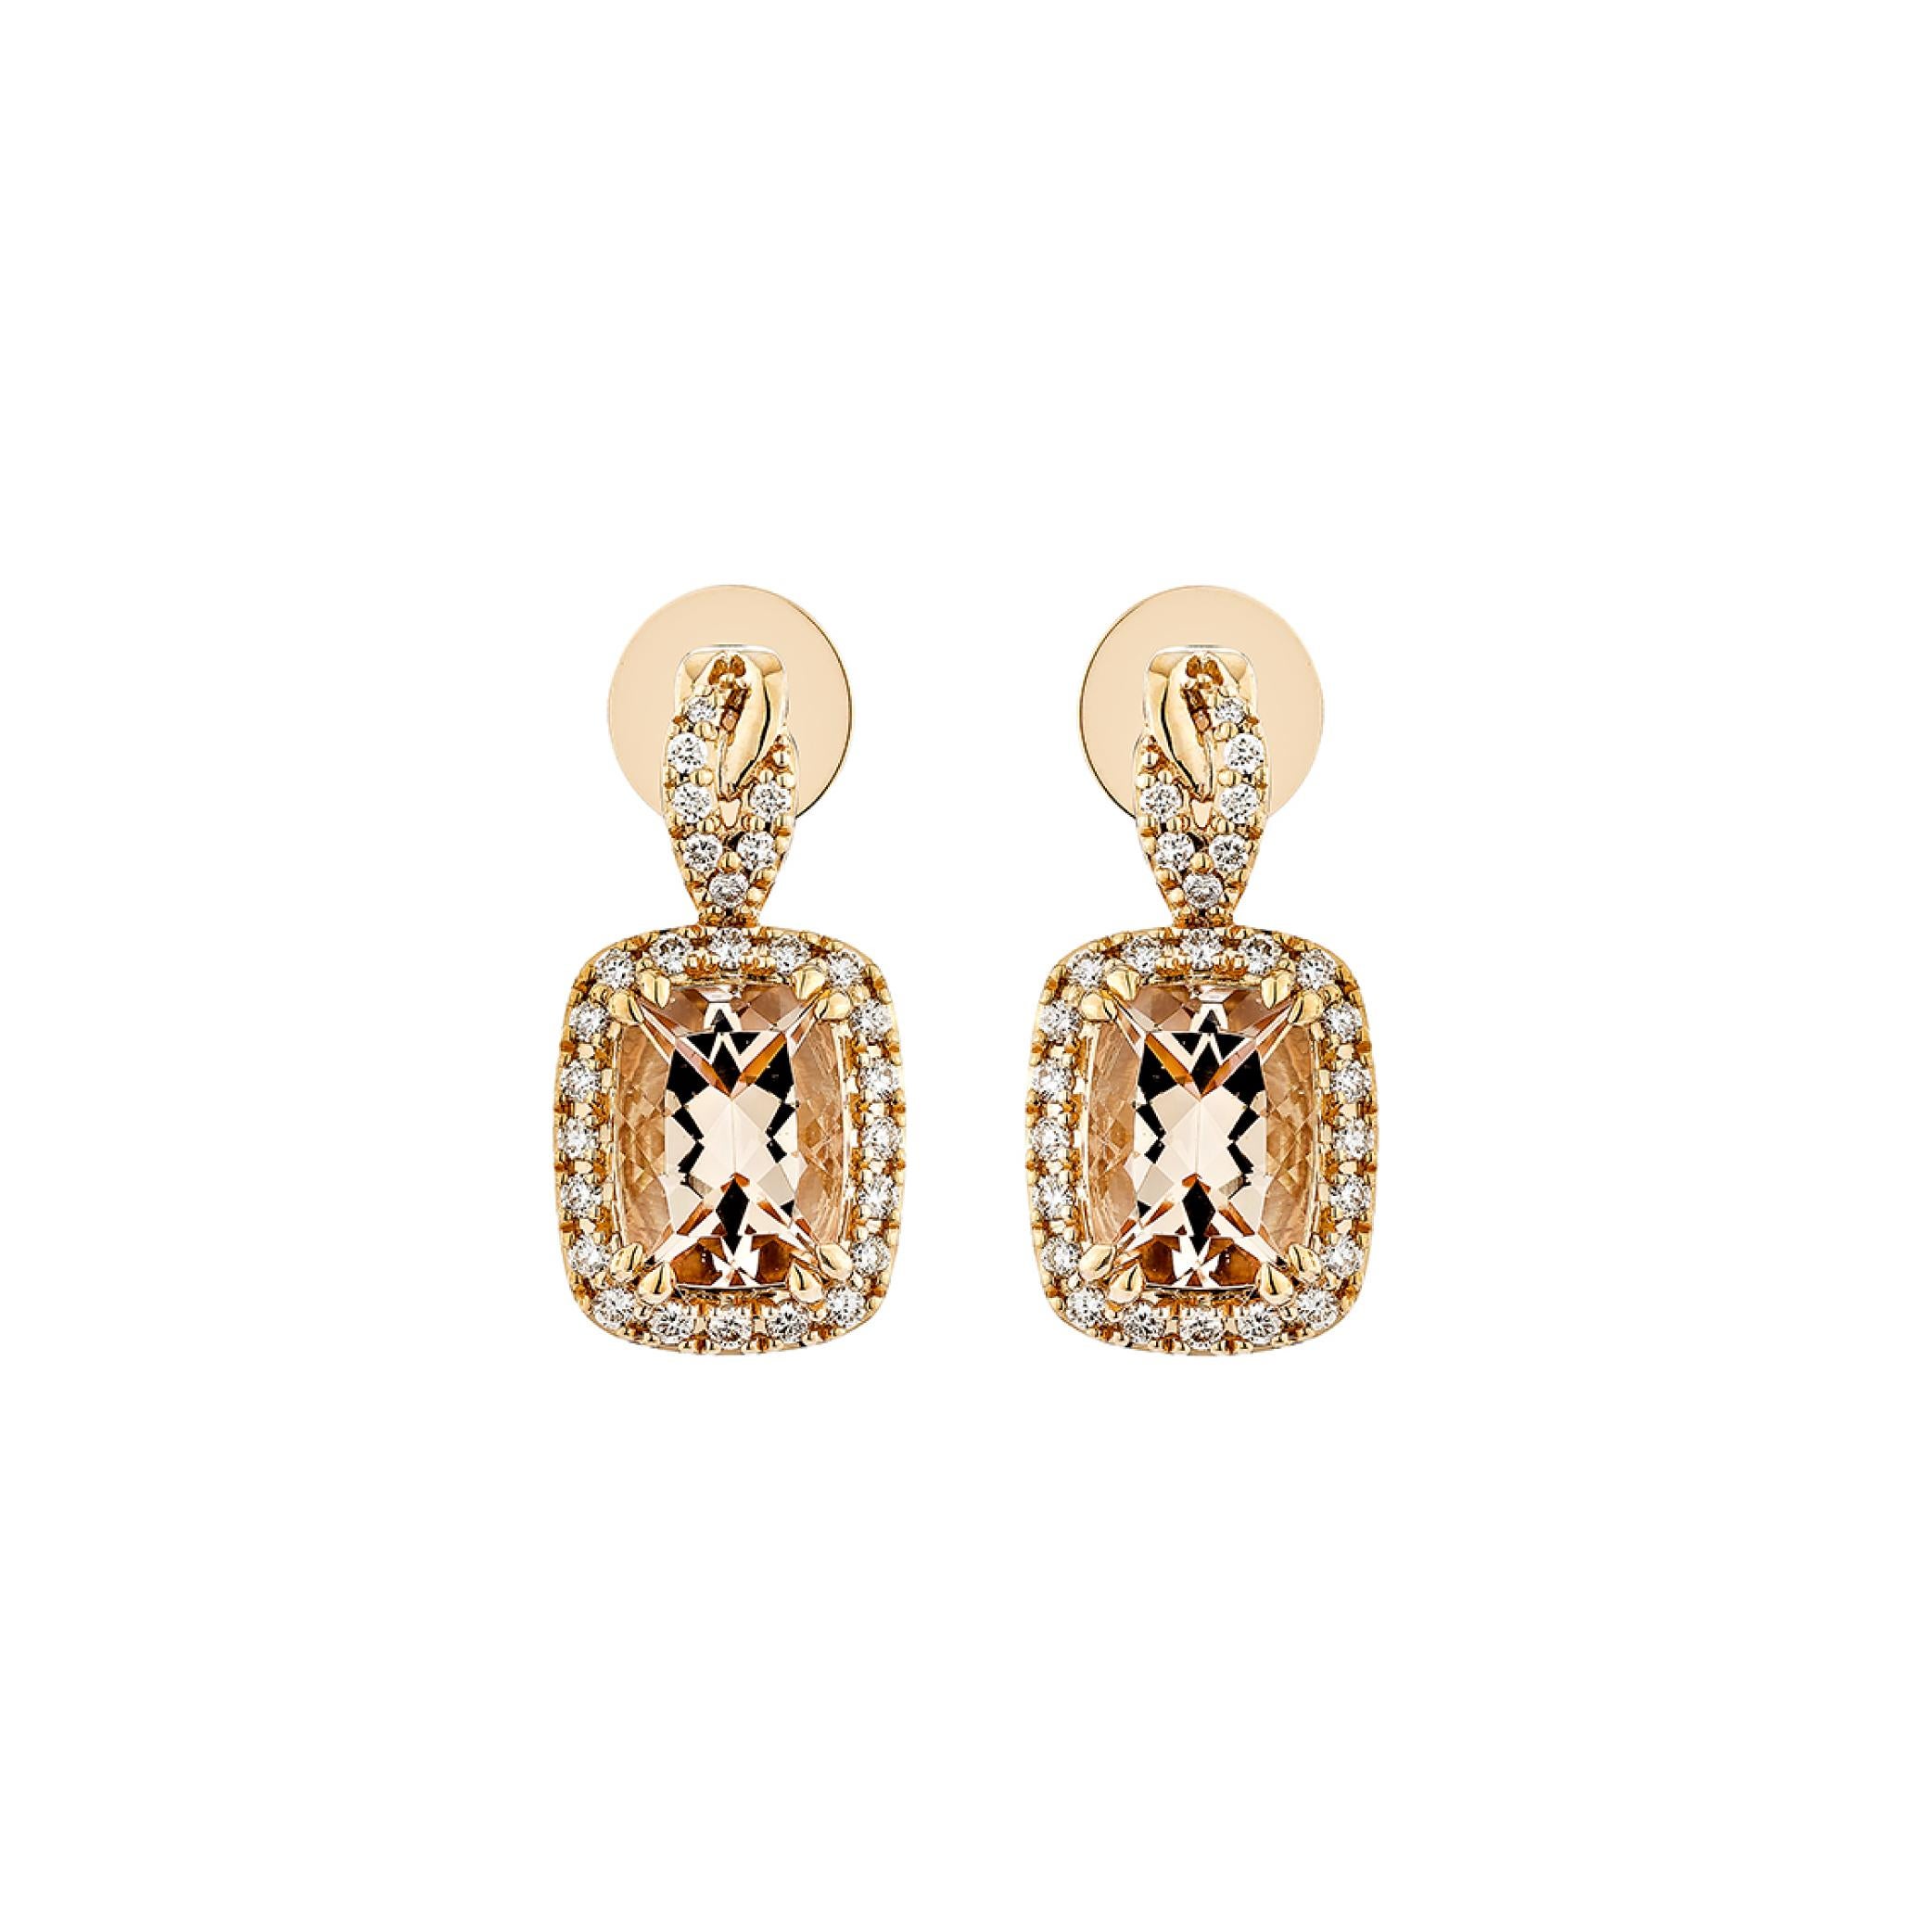 Contemporary 2.542 Carat Morganite Drop Earring in 18Karat Rose Gold with White Diamond. For Sale